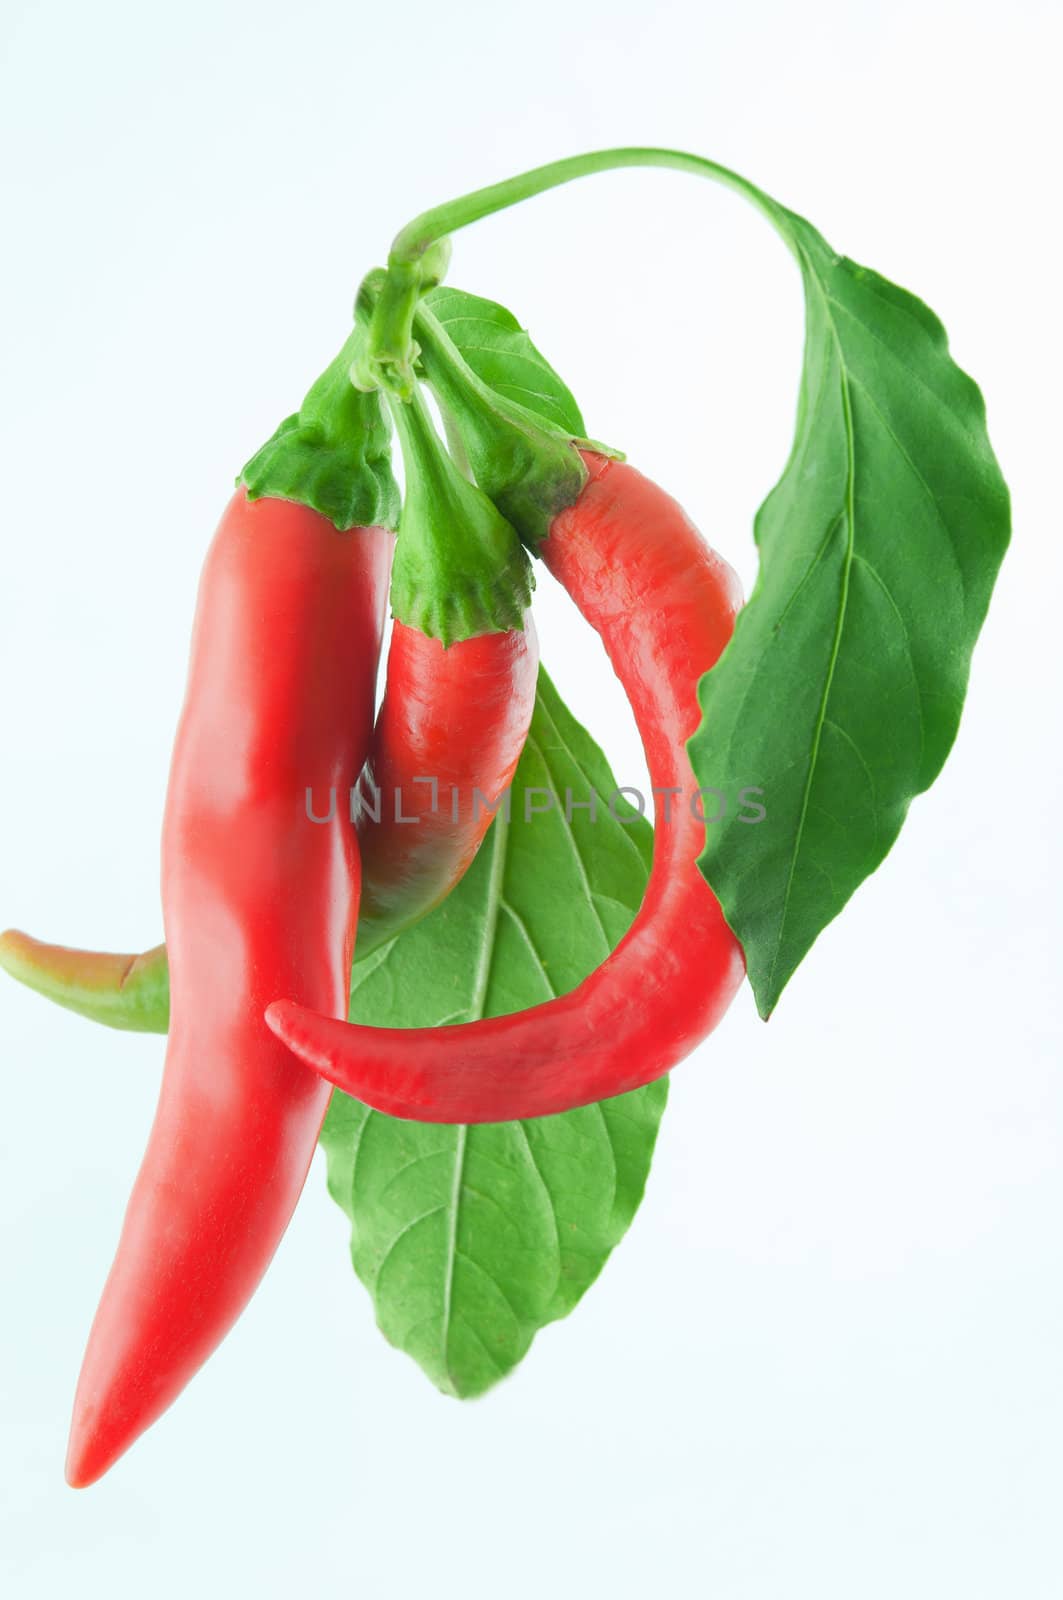 Three red, bitter chili with leaves against a white background